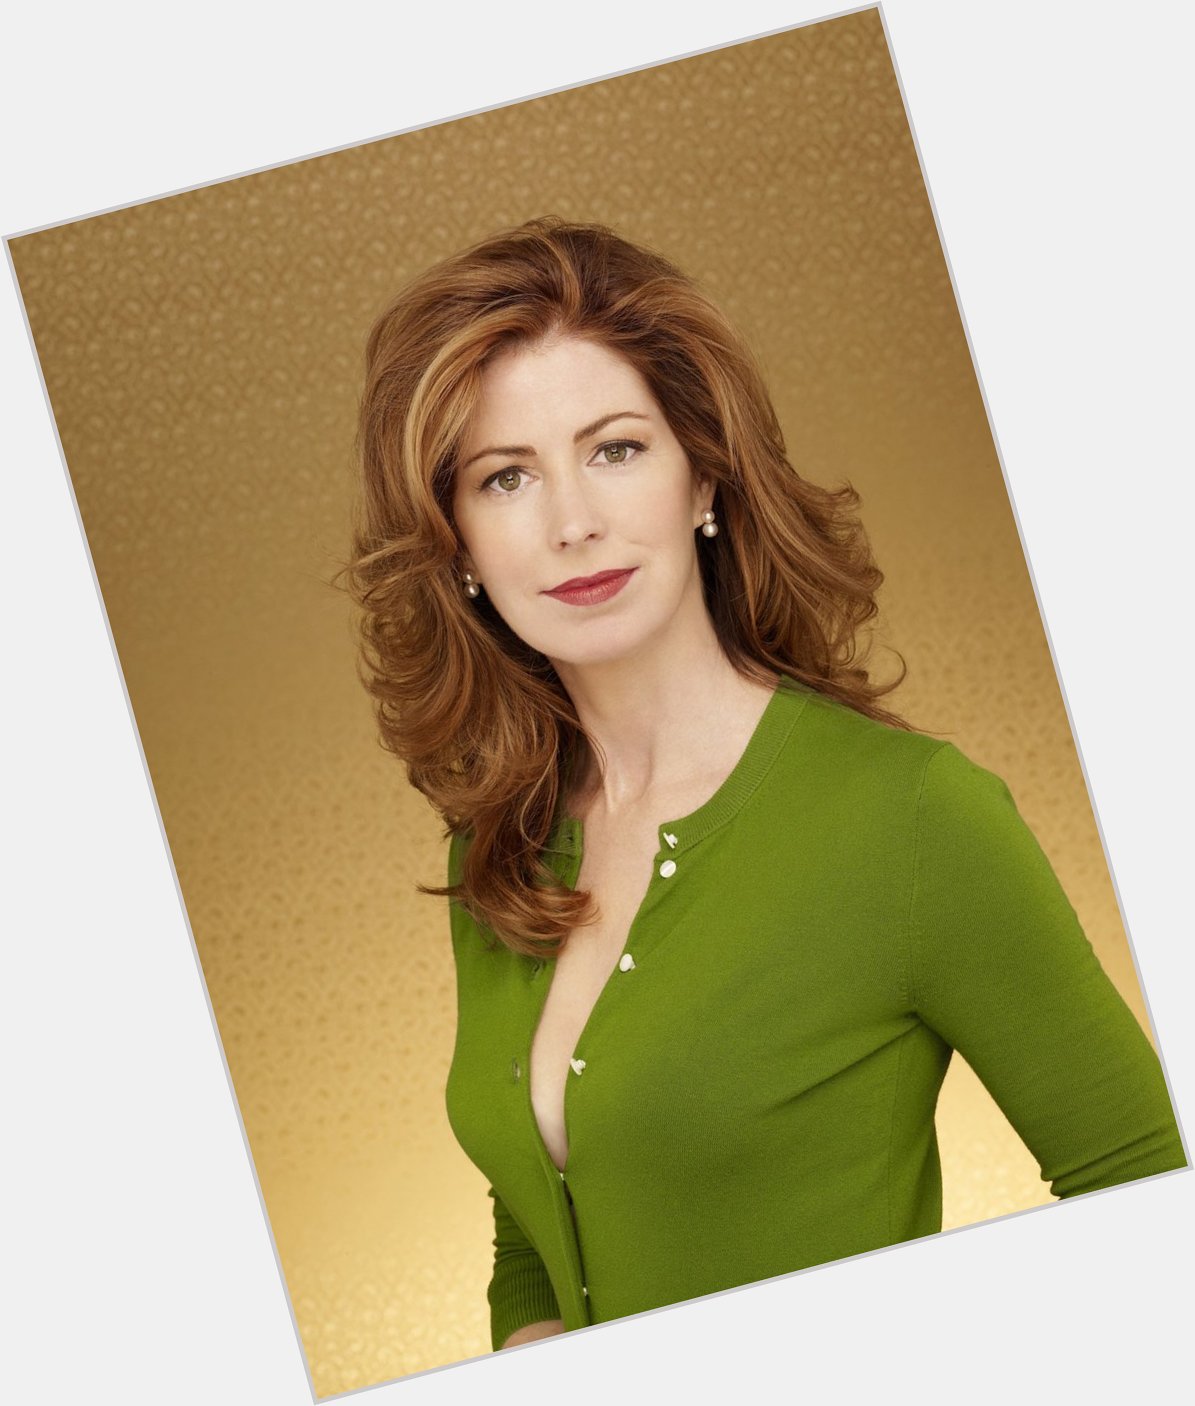 Good Morning people. Starting Saturday with a Happy Birthday to DANA DELANY 